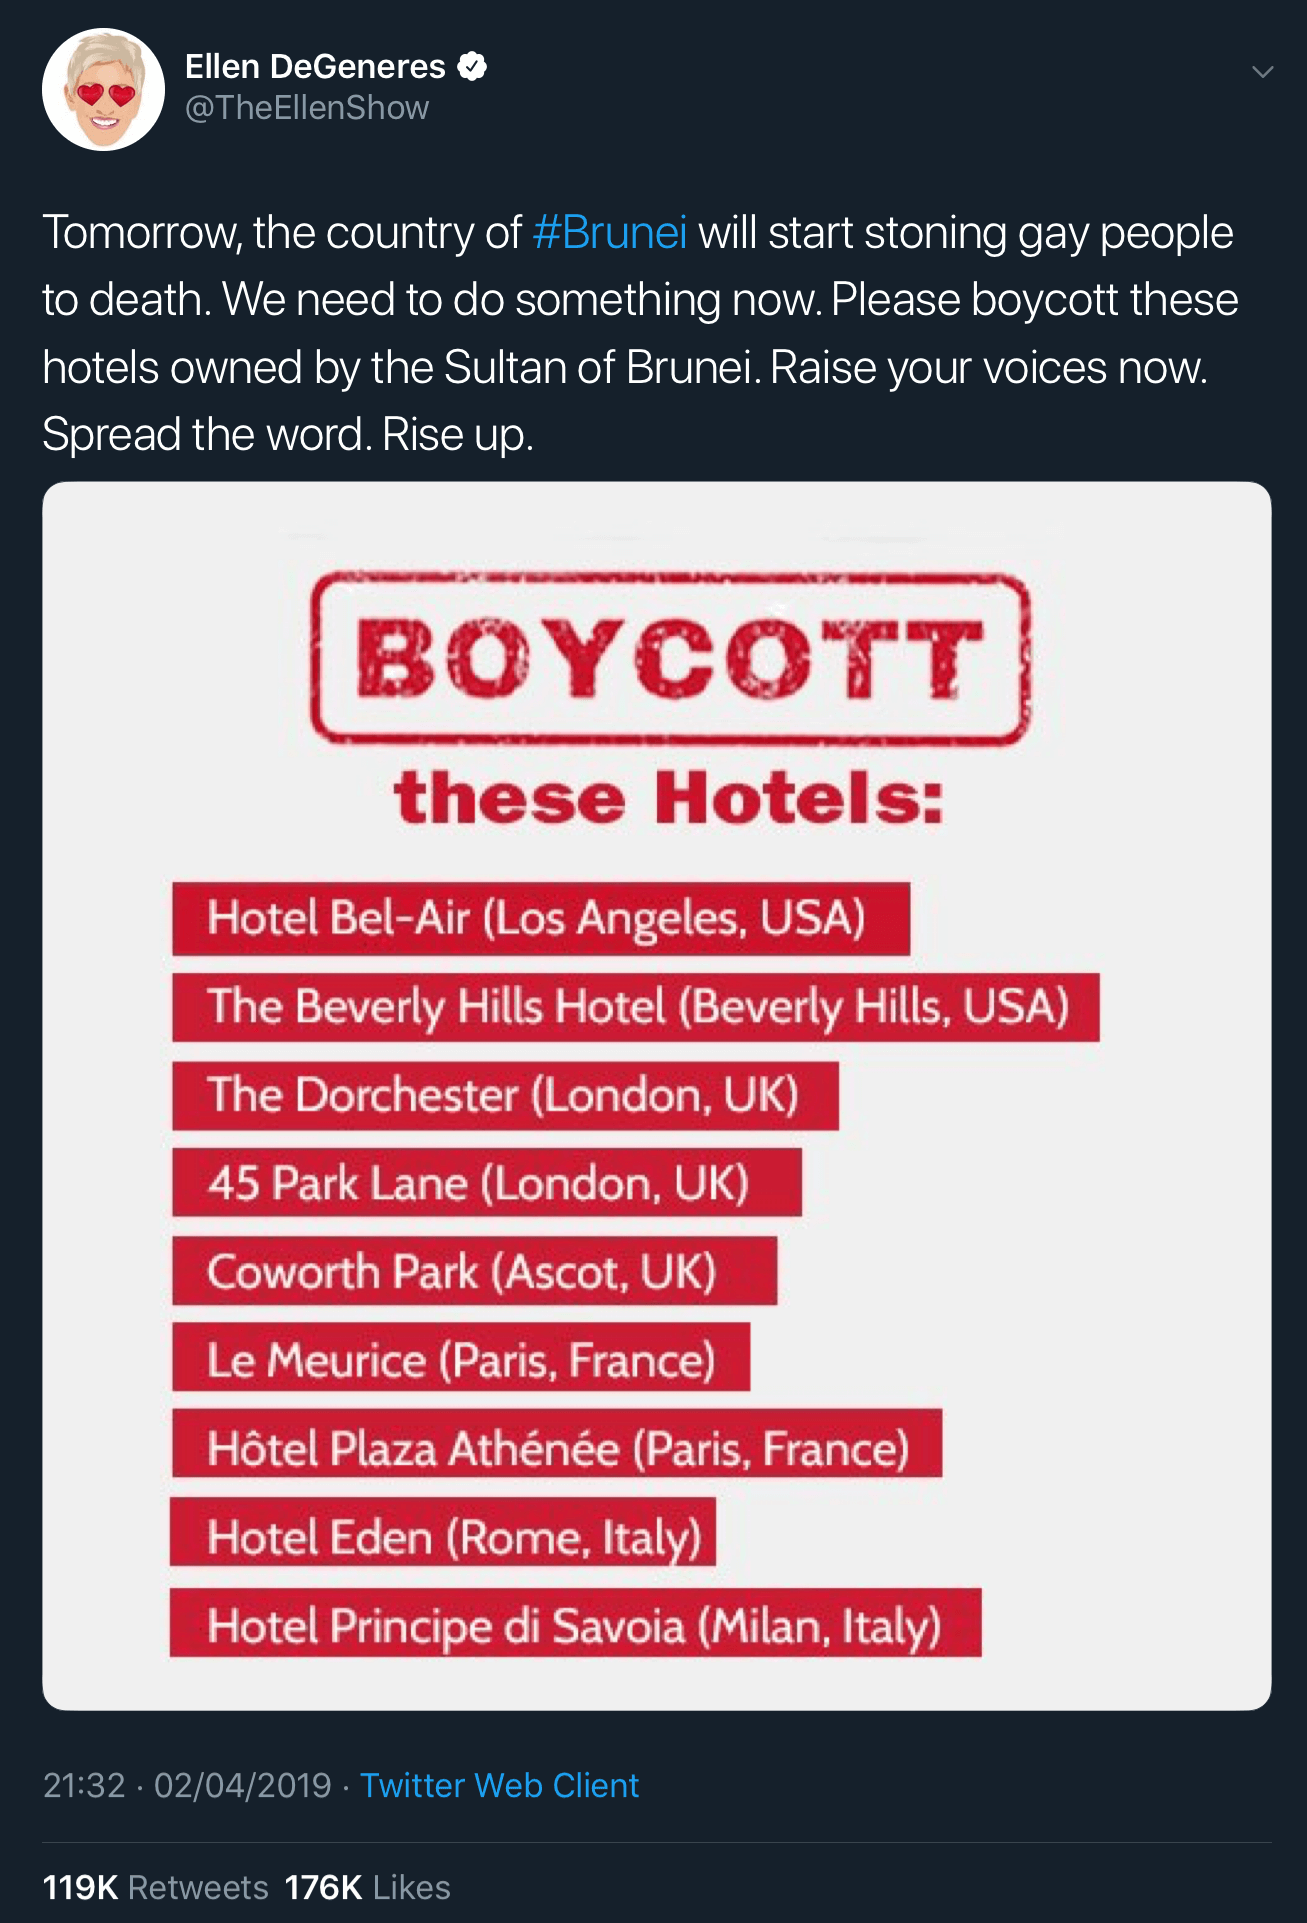 Ellen DeGeneres listing the hotels owned by the Sultan of Brunei and calling on the public to boycott them.